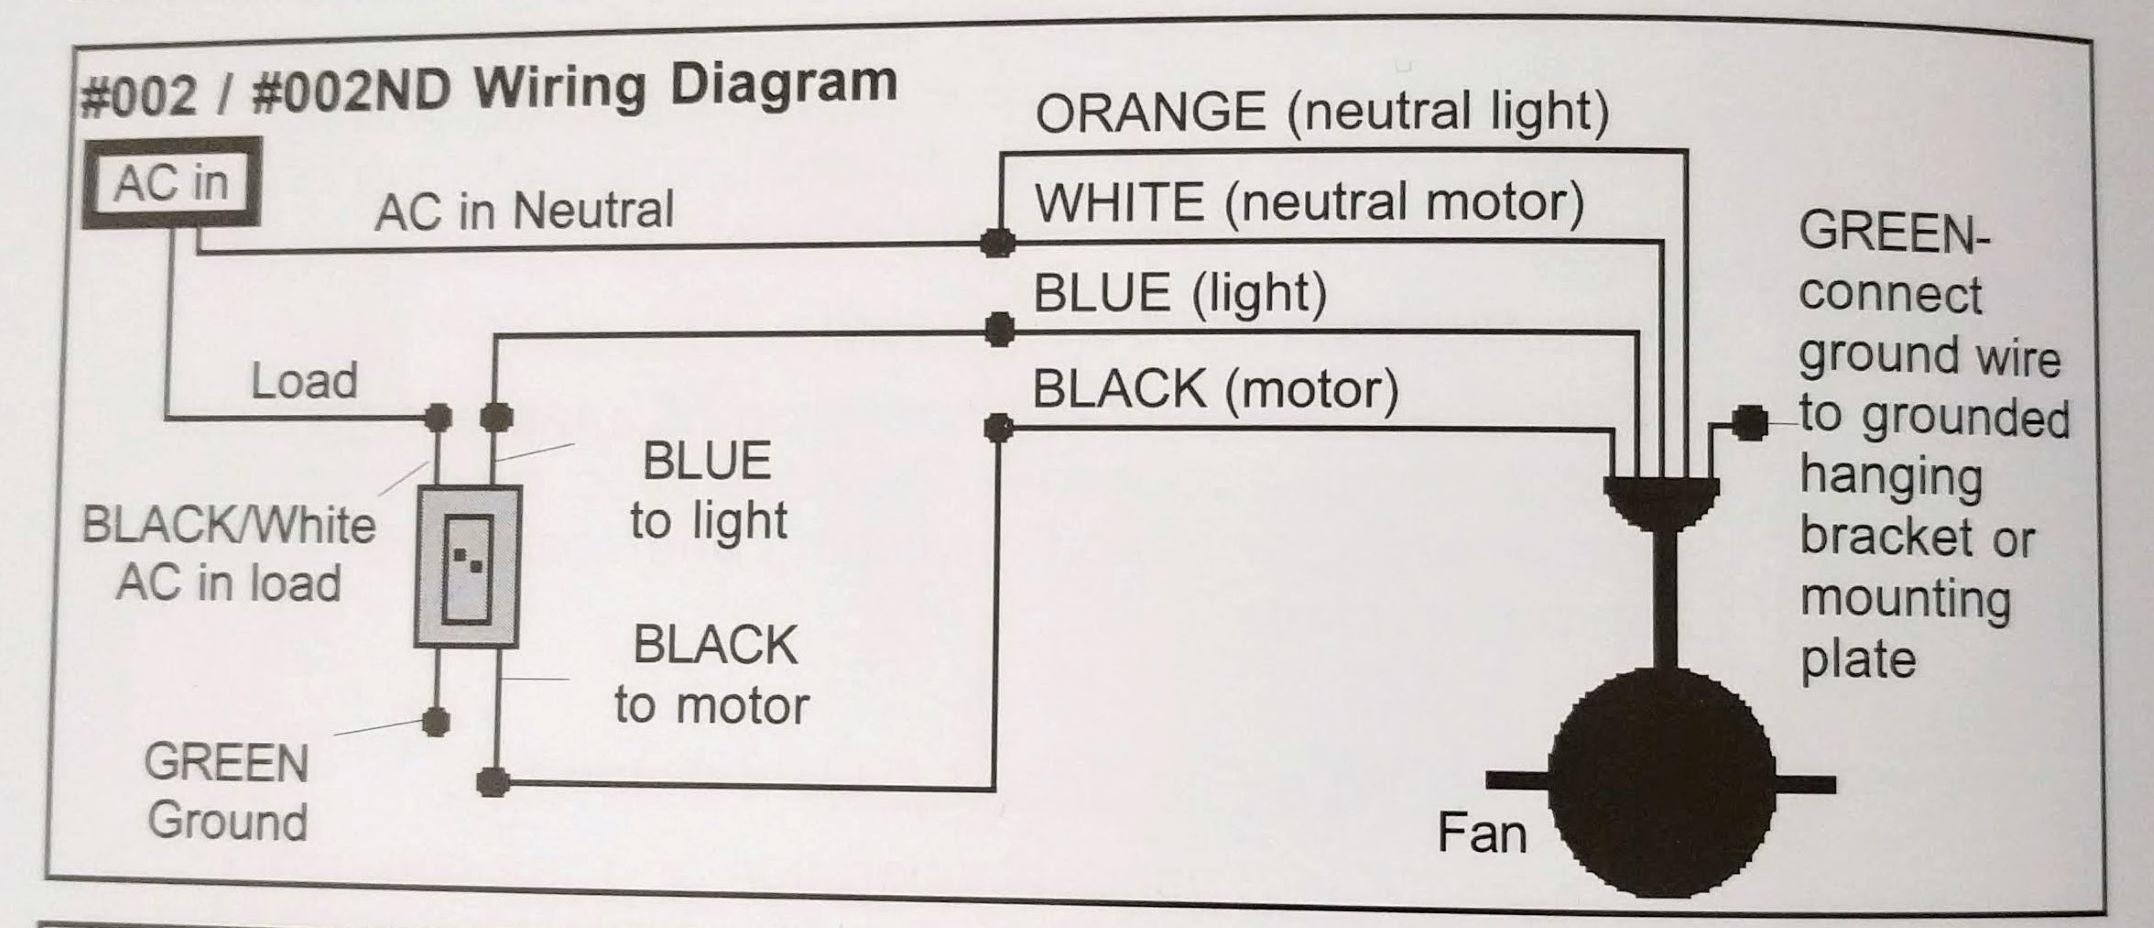 Wiring A Ceiling Fan With Black White Red Green In in size 2154 X 928